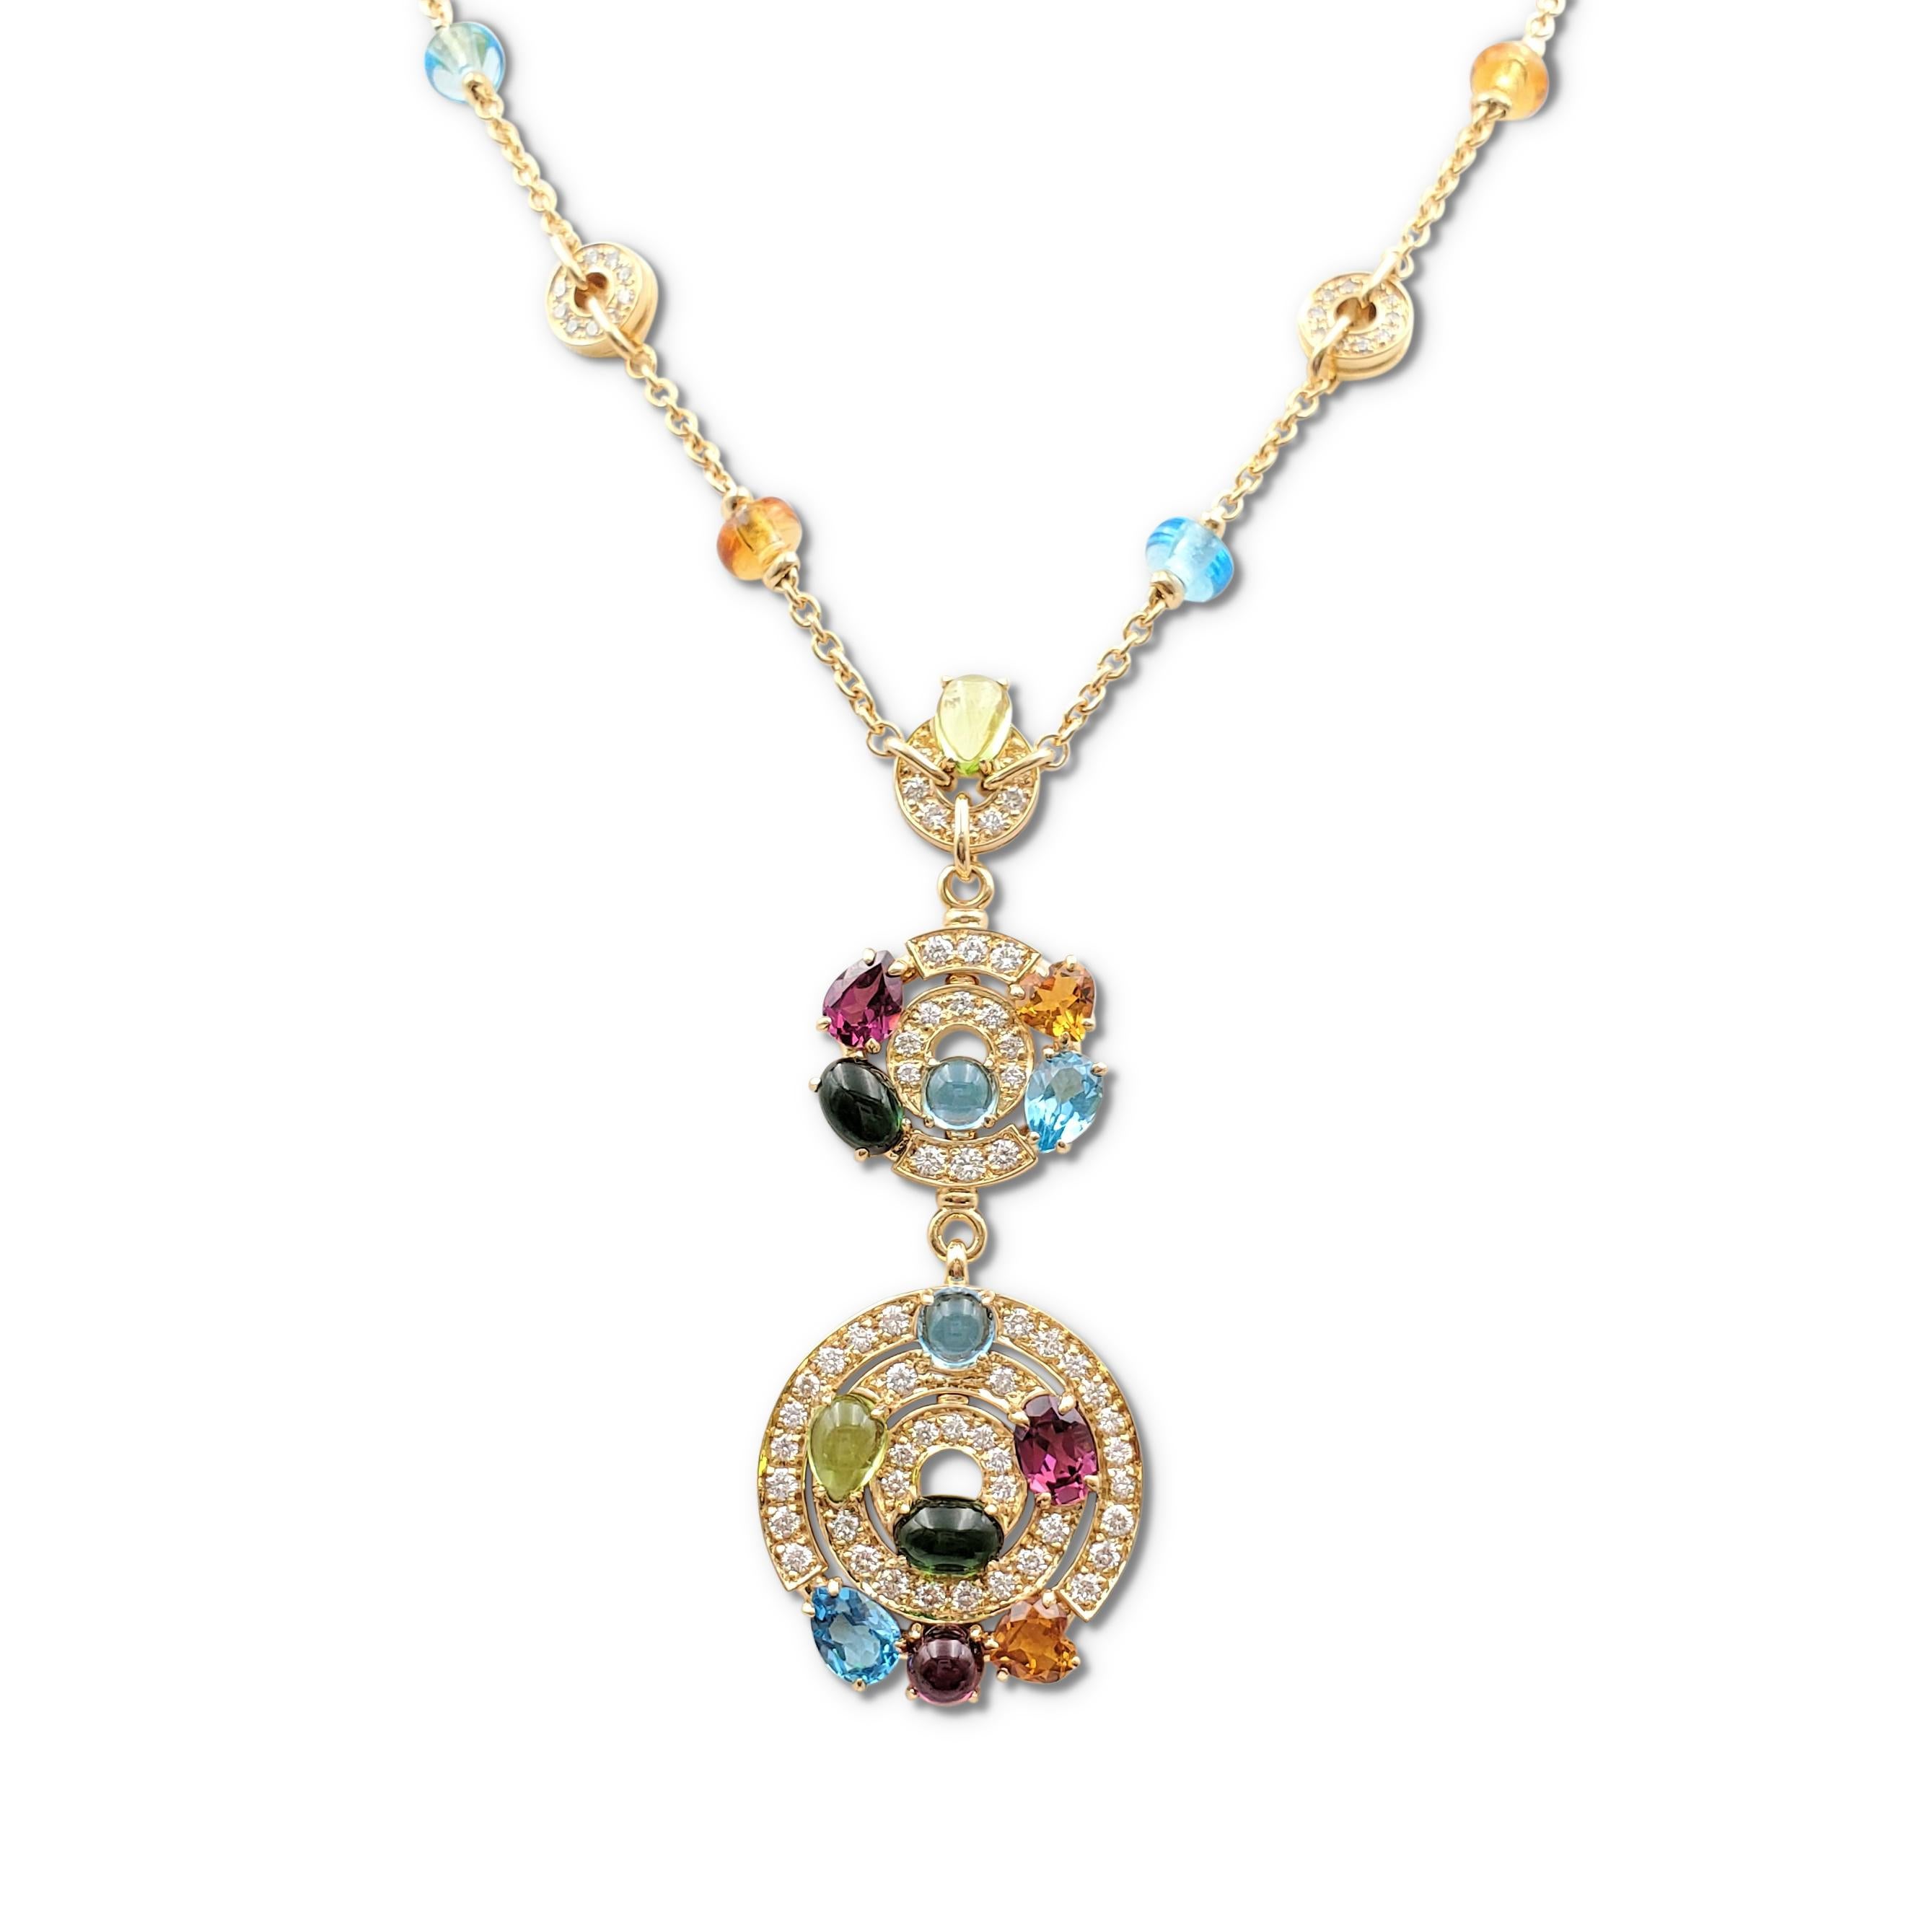 Authentic Bvlgari necklace from the 'Astrale' collection crafted in 18 karat yellow gold and comprised of three graduating circular pave set diamond and multi-colored gemstone discs. Each disc is composed of faceted and cabochon gemstones, including